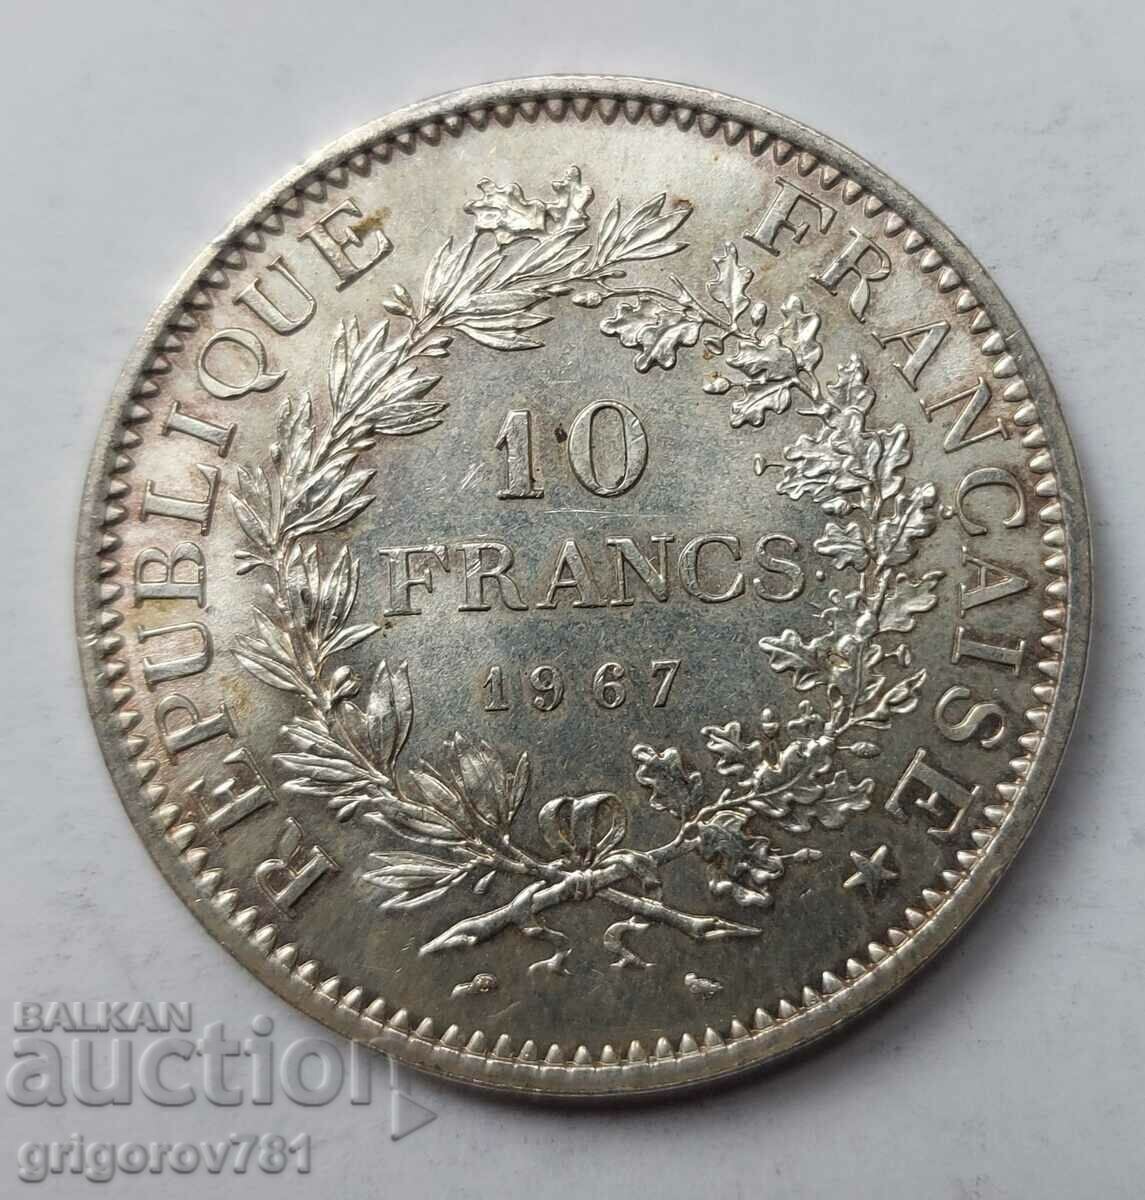 10 Francs Silver France 1967 - Silver Coin #66